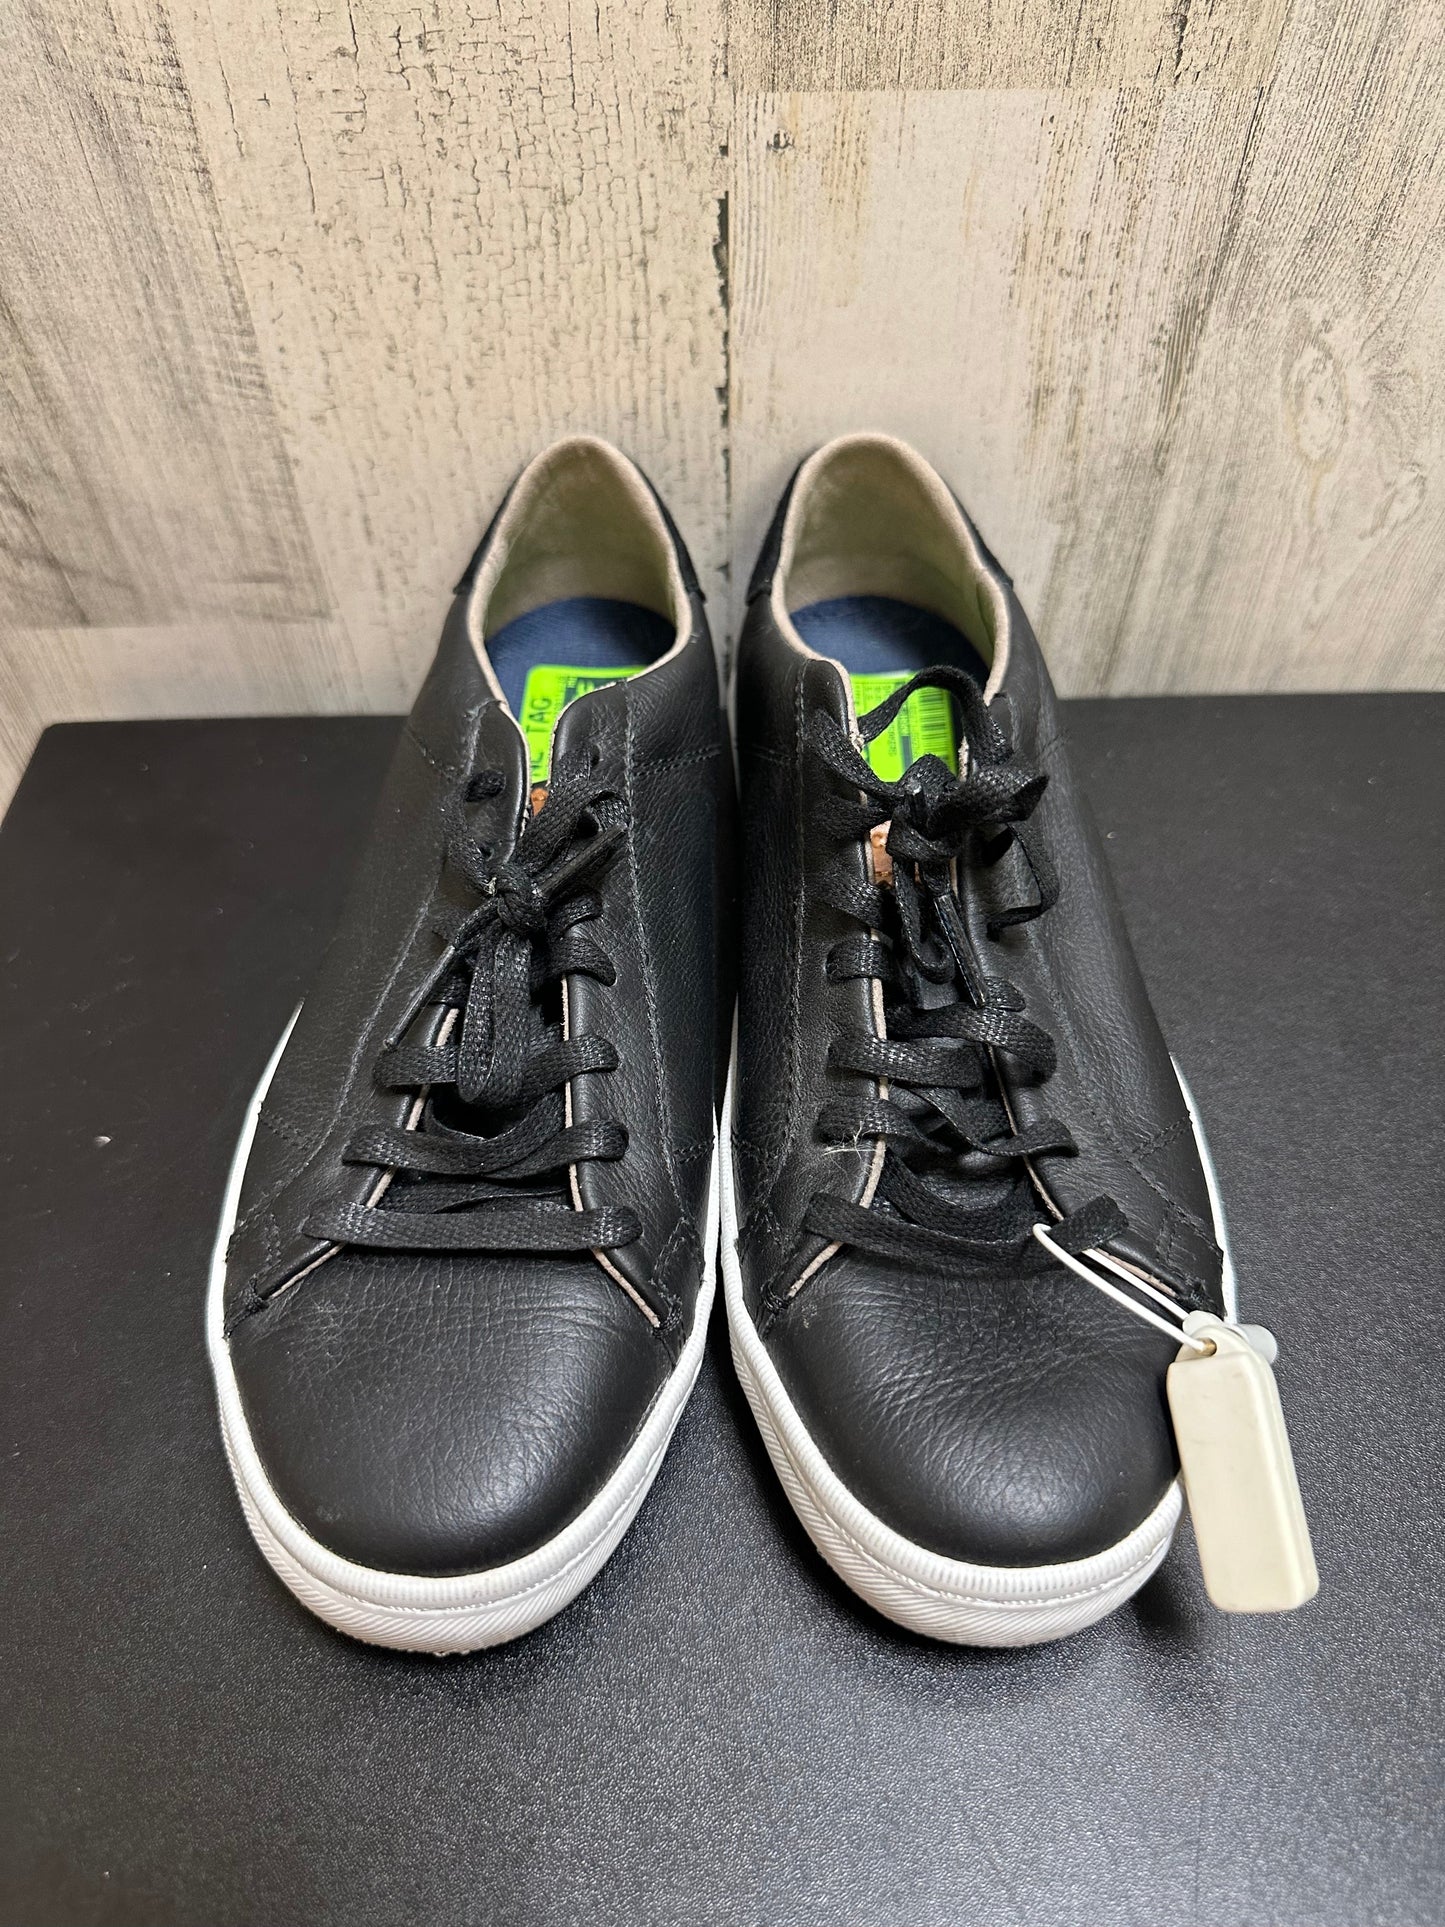 Black Shoes Sneakers Cole-haan, Size 6.5